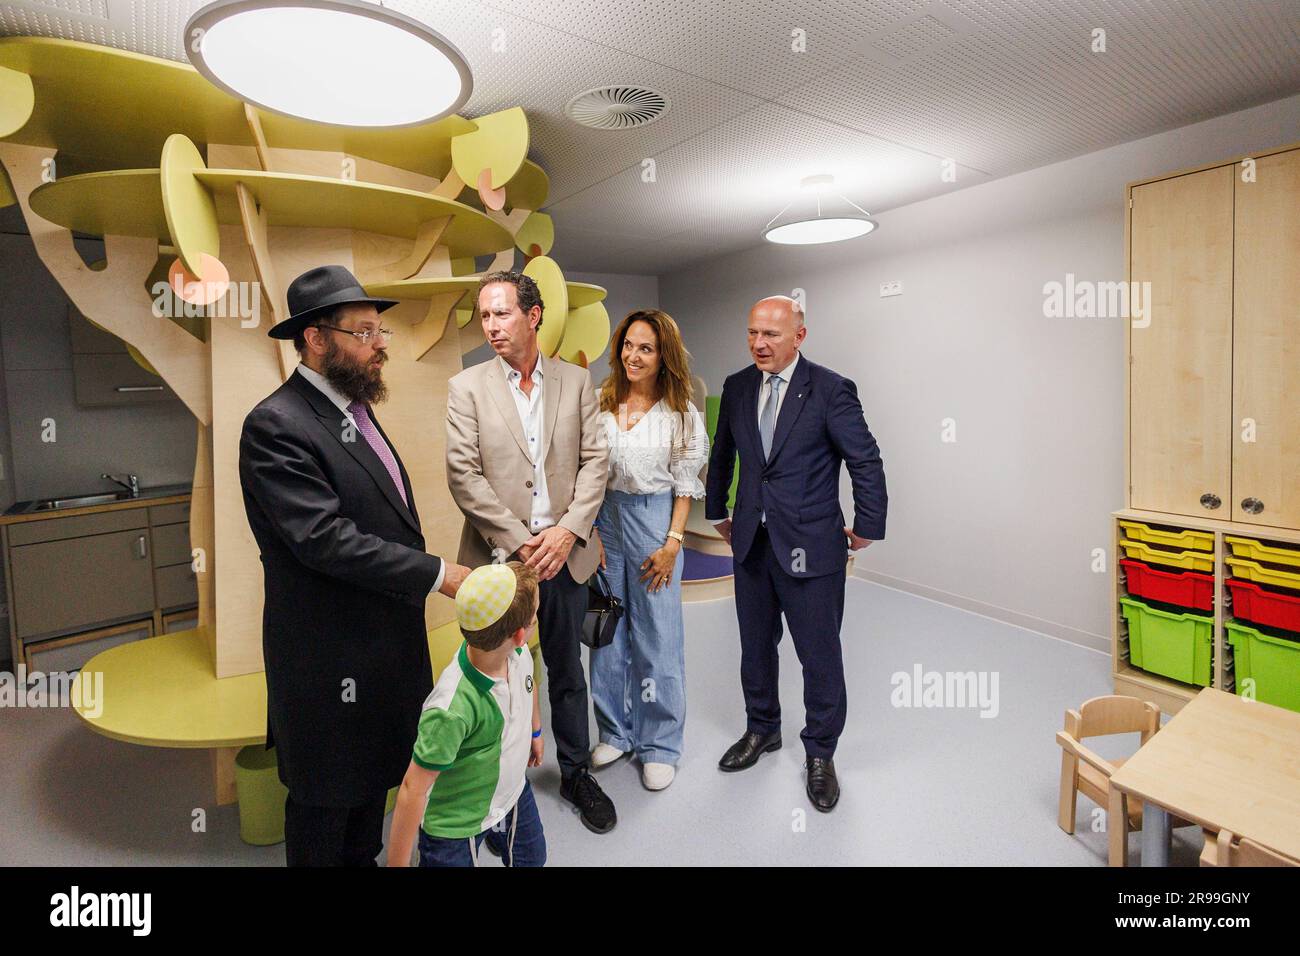 25 June 2023, Berlin: Rabbi Yehuda Teichtal (l-r), Trevor Pears (M), member of the board of the Pears Foundation, Daniela Pears and Kai Wegner, governing mayor of Berlin, stand in a room during a tour after the opening ceremony of the Pears Jewish Campus (PJC) in the building. The largest Jewish institution for education, culture and sports since the Shoah has opened in Berlin with a street party. The Pears Jewish Campus in Wilmersdorf offers 8,000 square meters of daycare, elementary and high school, art studios and music studios, a 100-seat cinema, and a sports and events hall. Photo: Carste Stock Photo